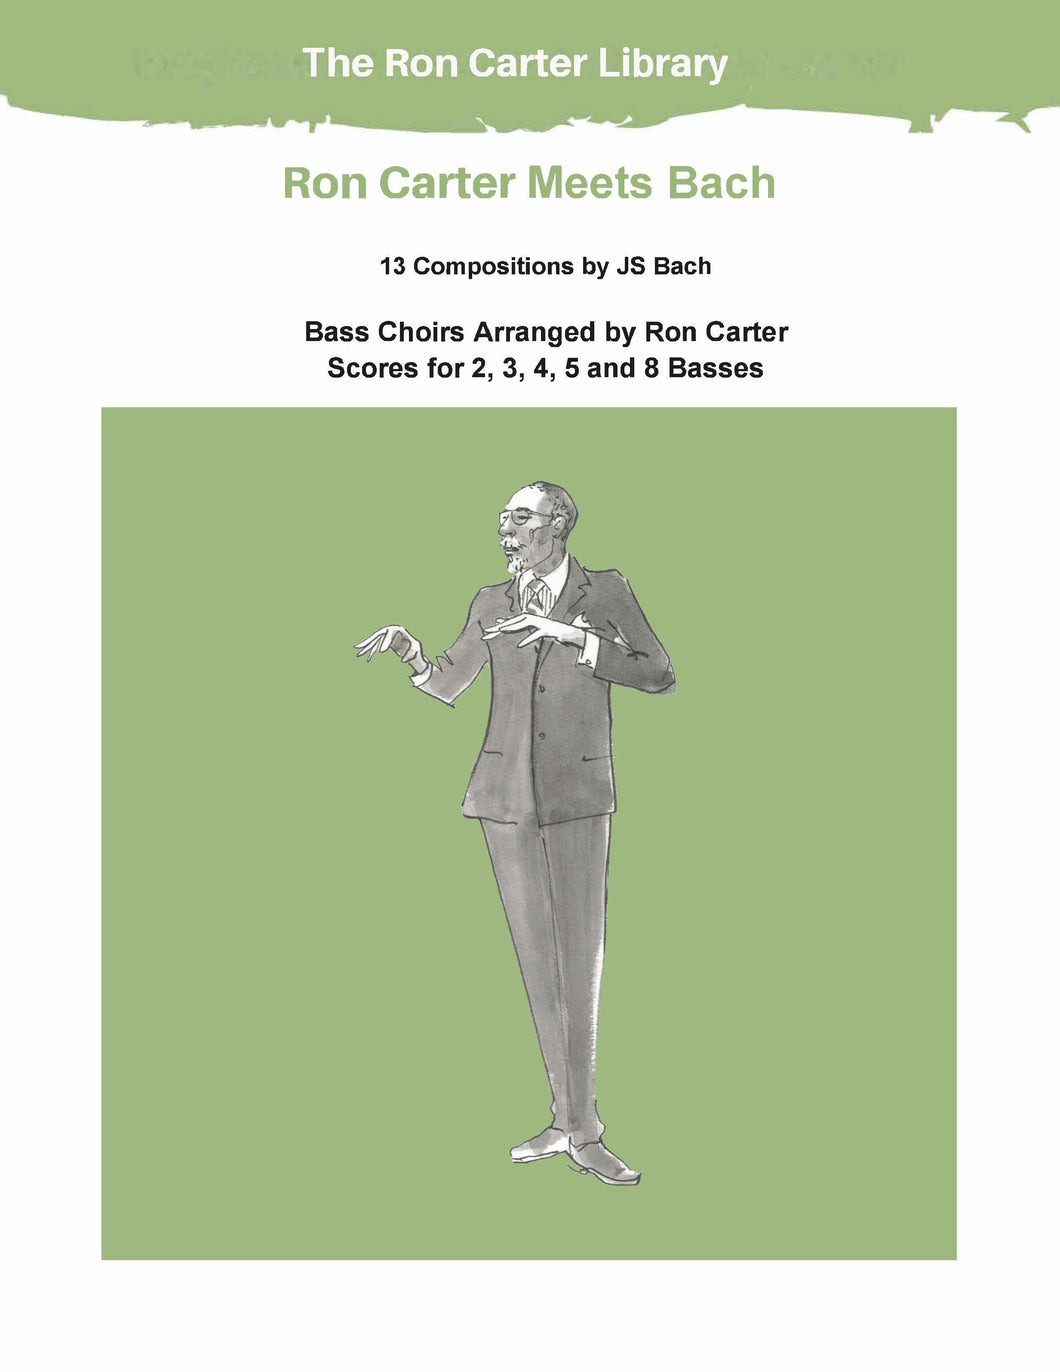 Ron Carter Meets Bach - Pieces for 2-8 basses – Ron Carter Books